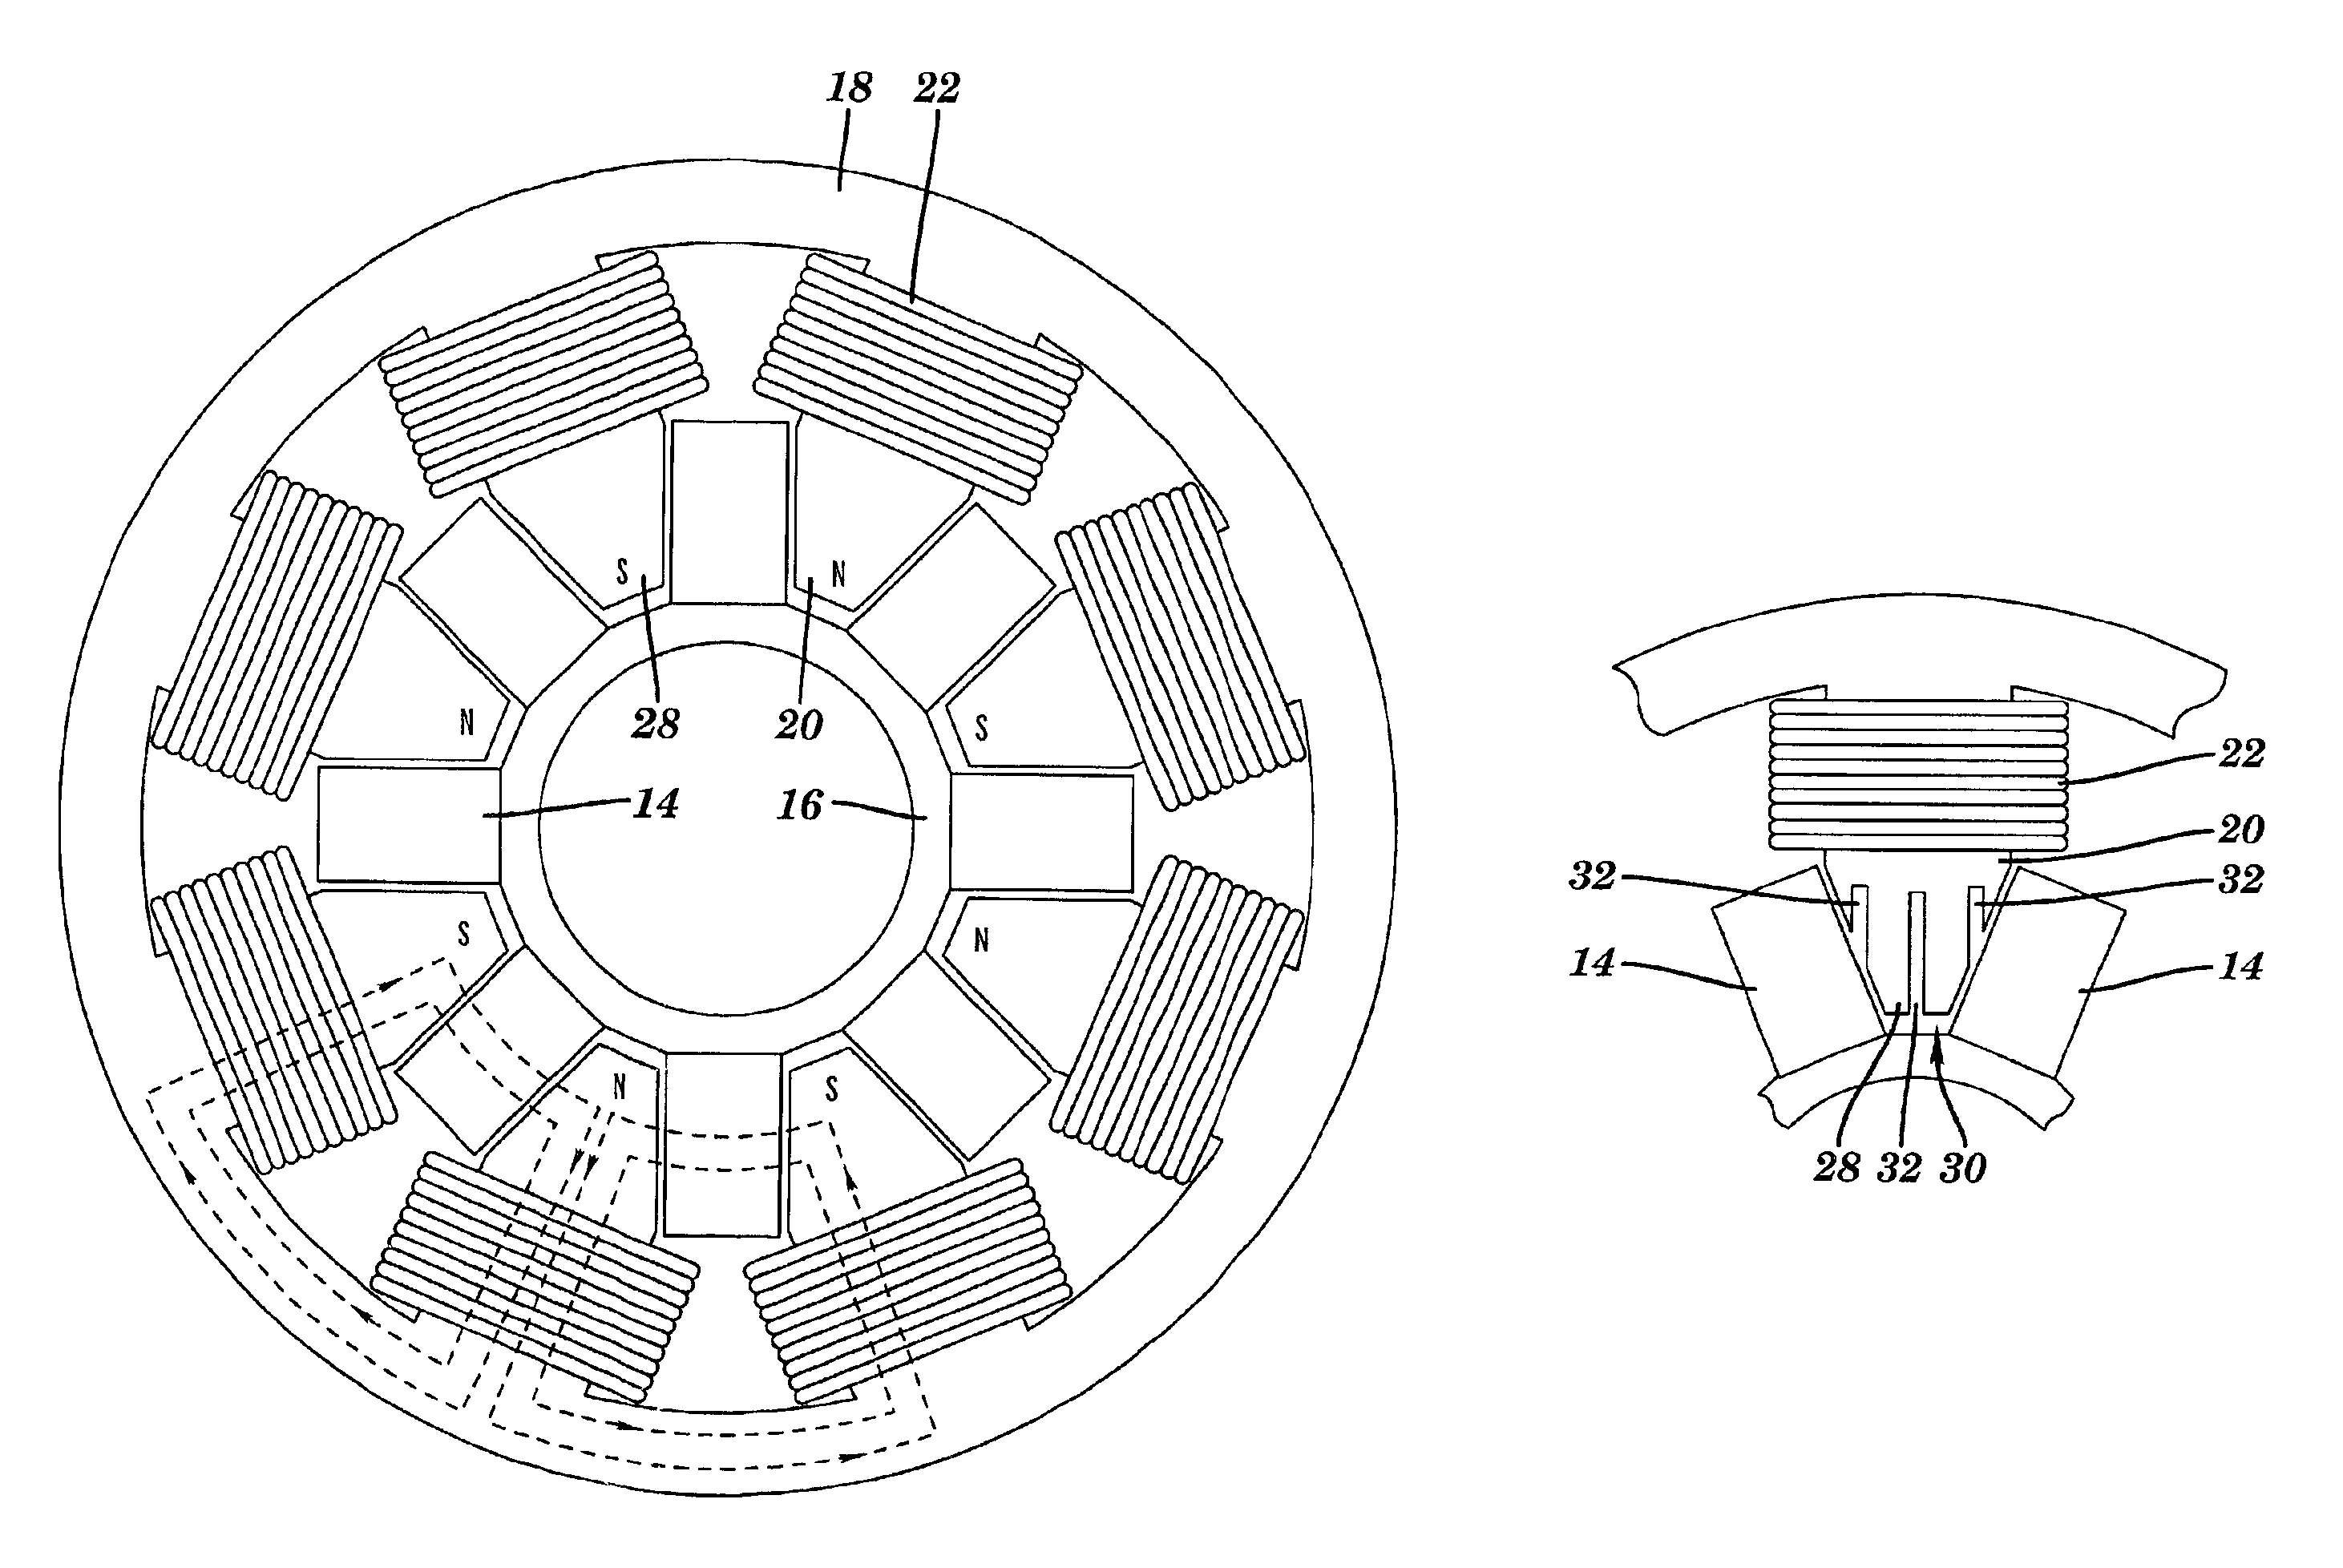 Low loss reciprocating electromagnetic device